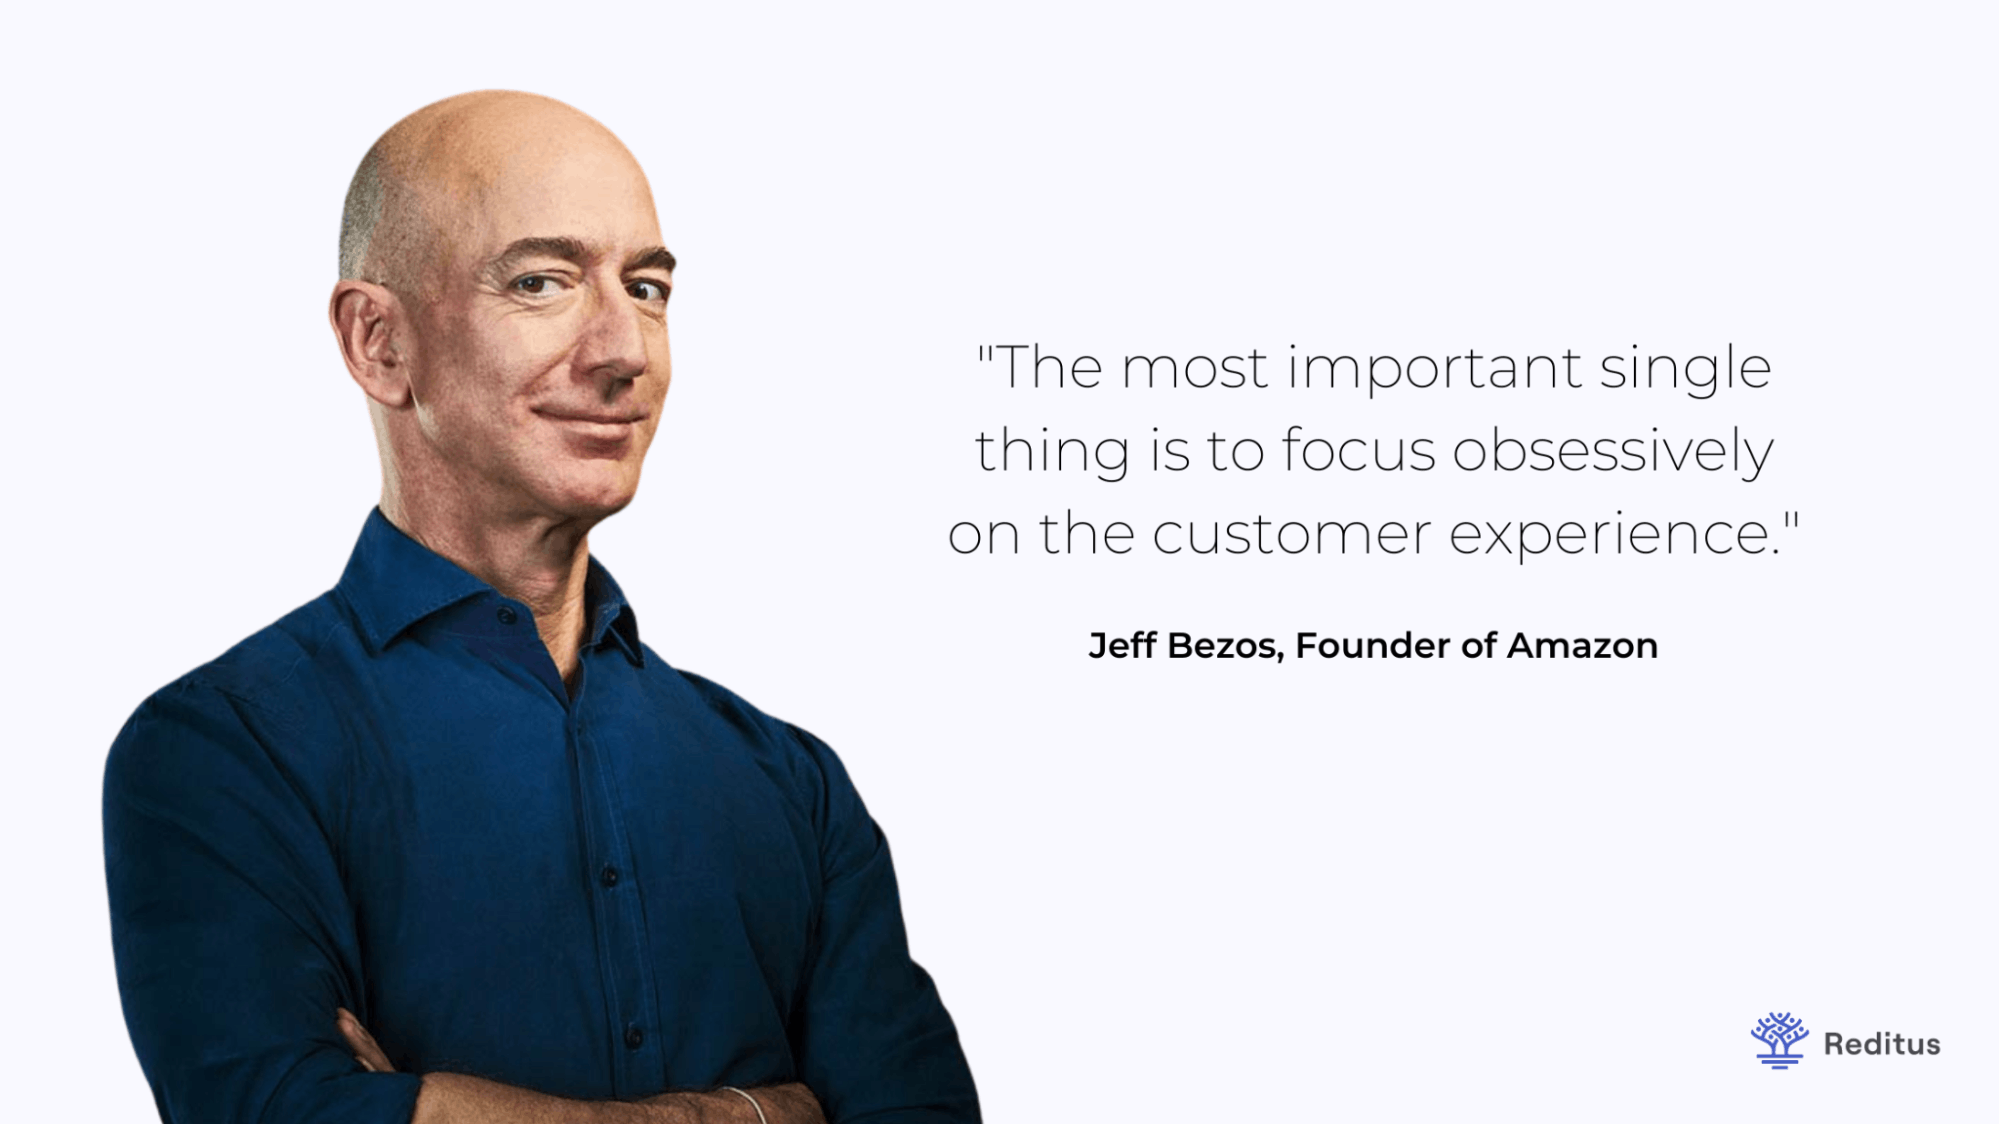 A Quote by Jeff Bezos, Founder of Amazon